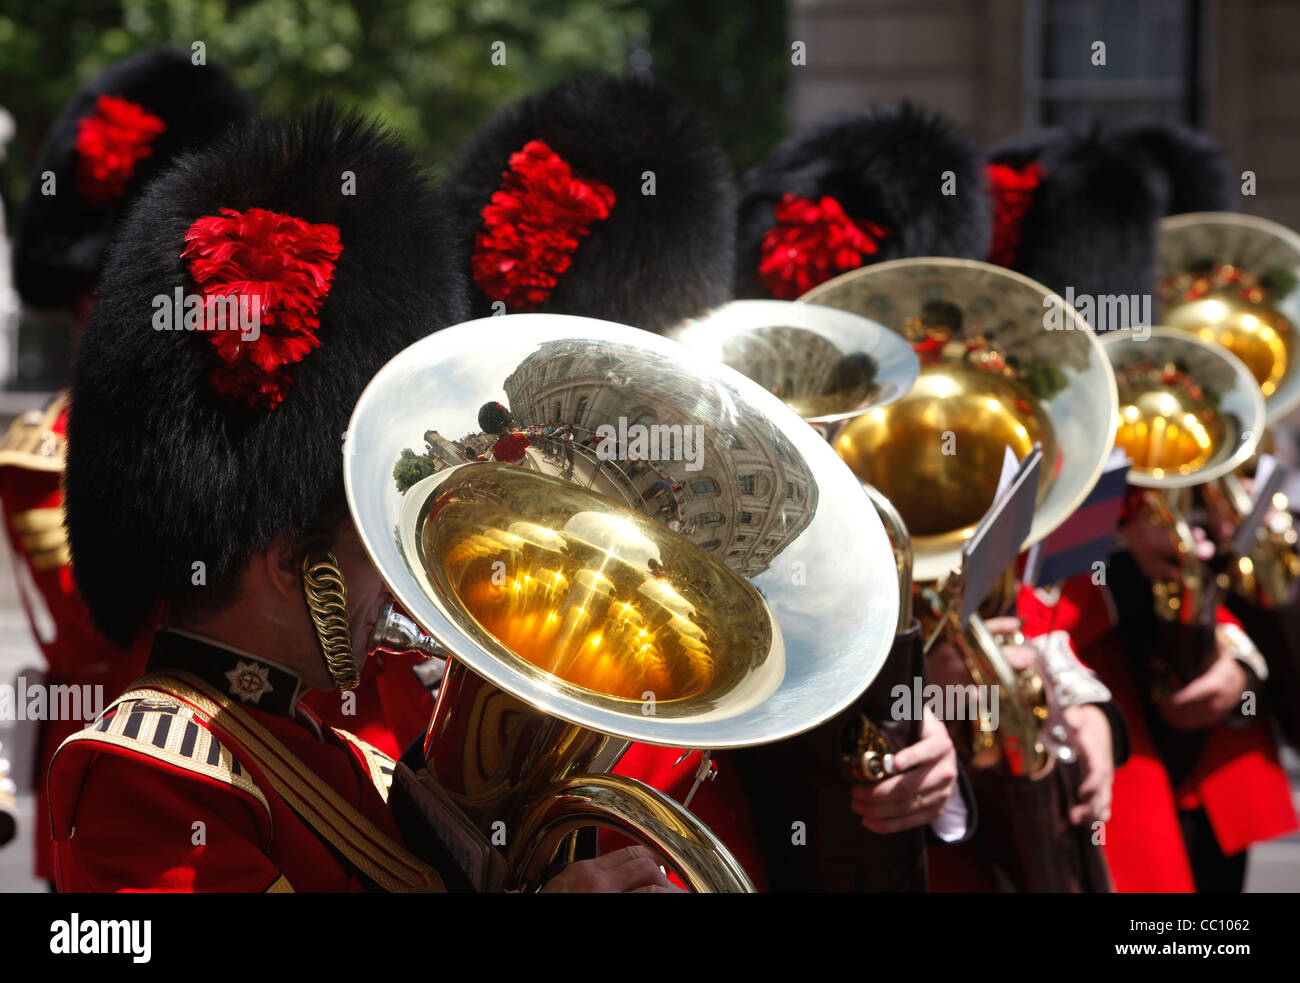 Military band wearing bearskin hats on Veterans' Day in London, England Stock Photo